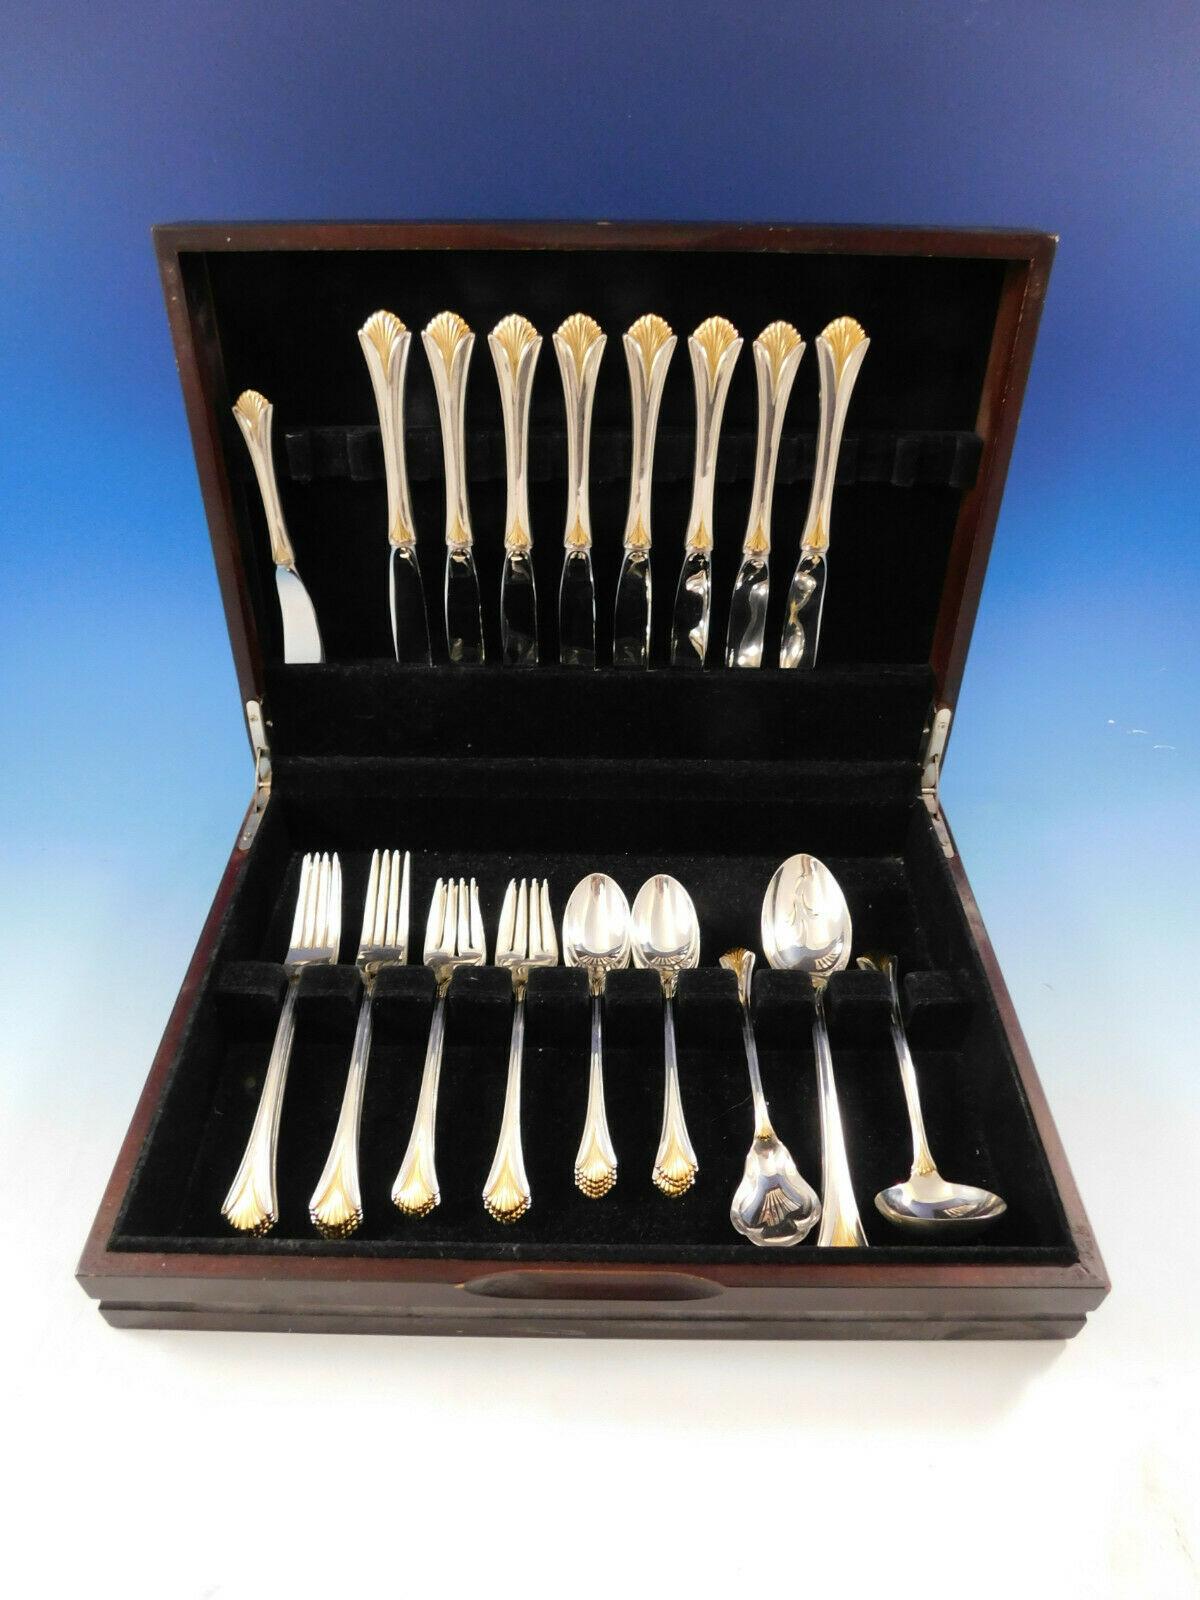 Regency Shell Gold by Lunt sterling silver Flatware set with gold accent, 37 pieces. This set includes:

8 knives, 9 1/8